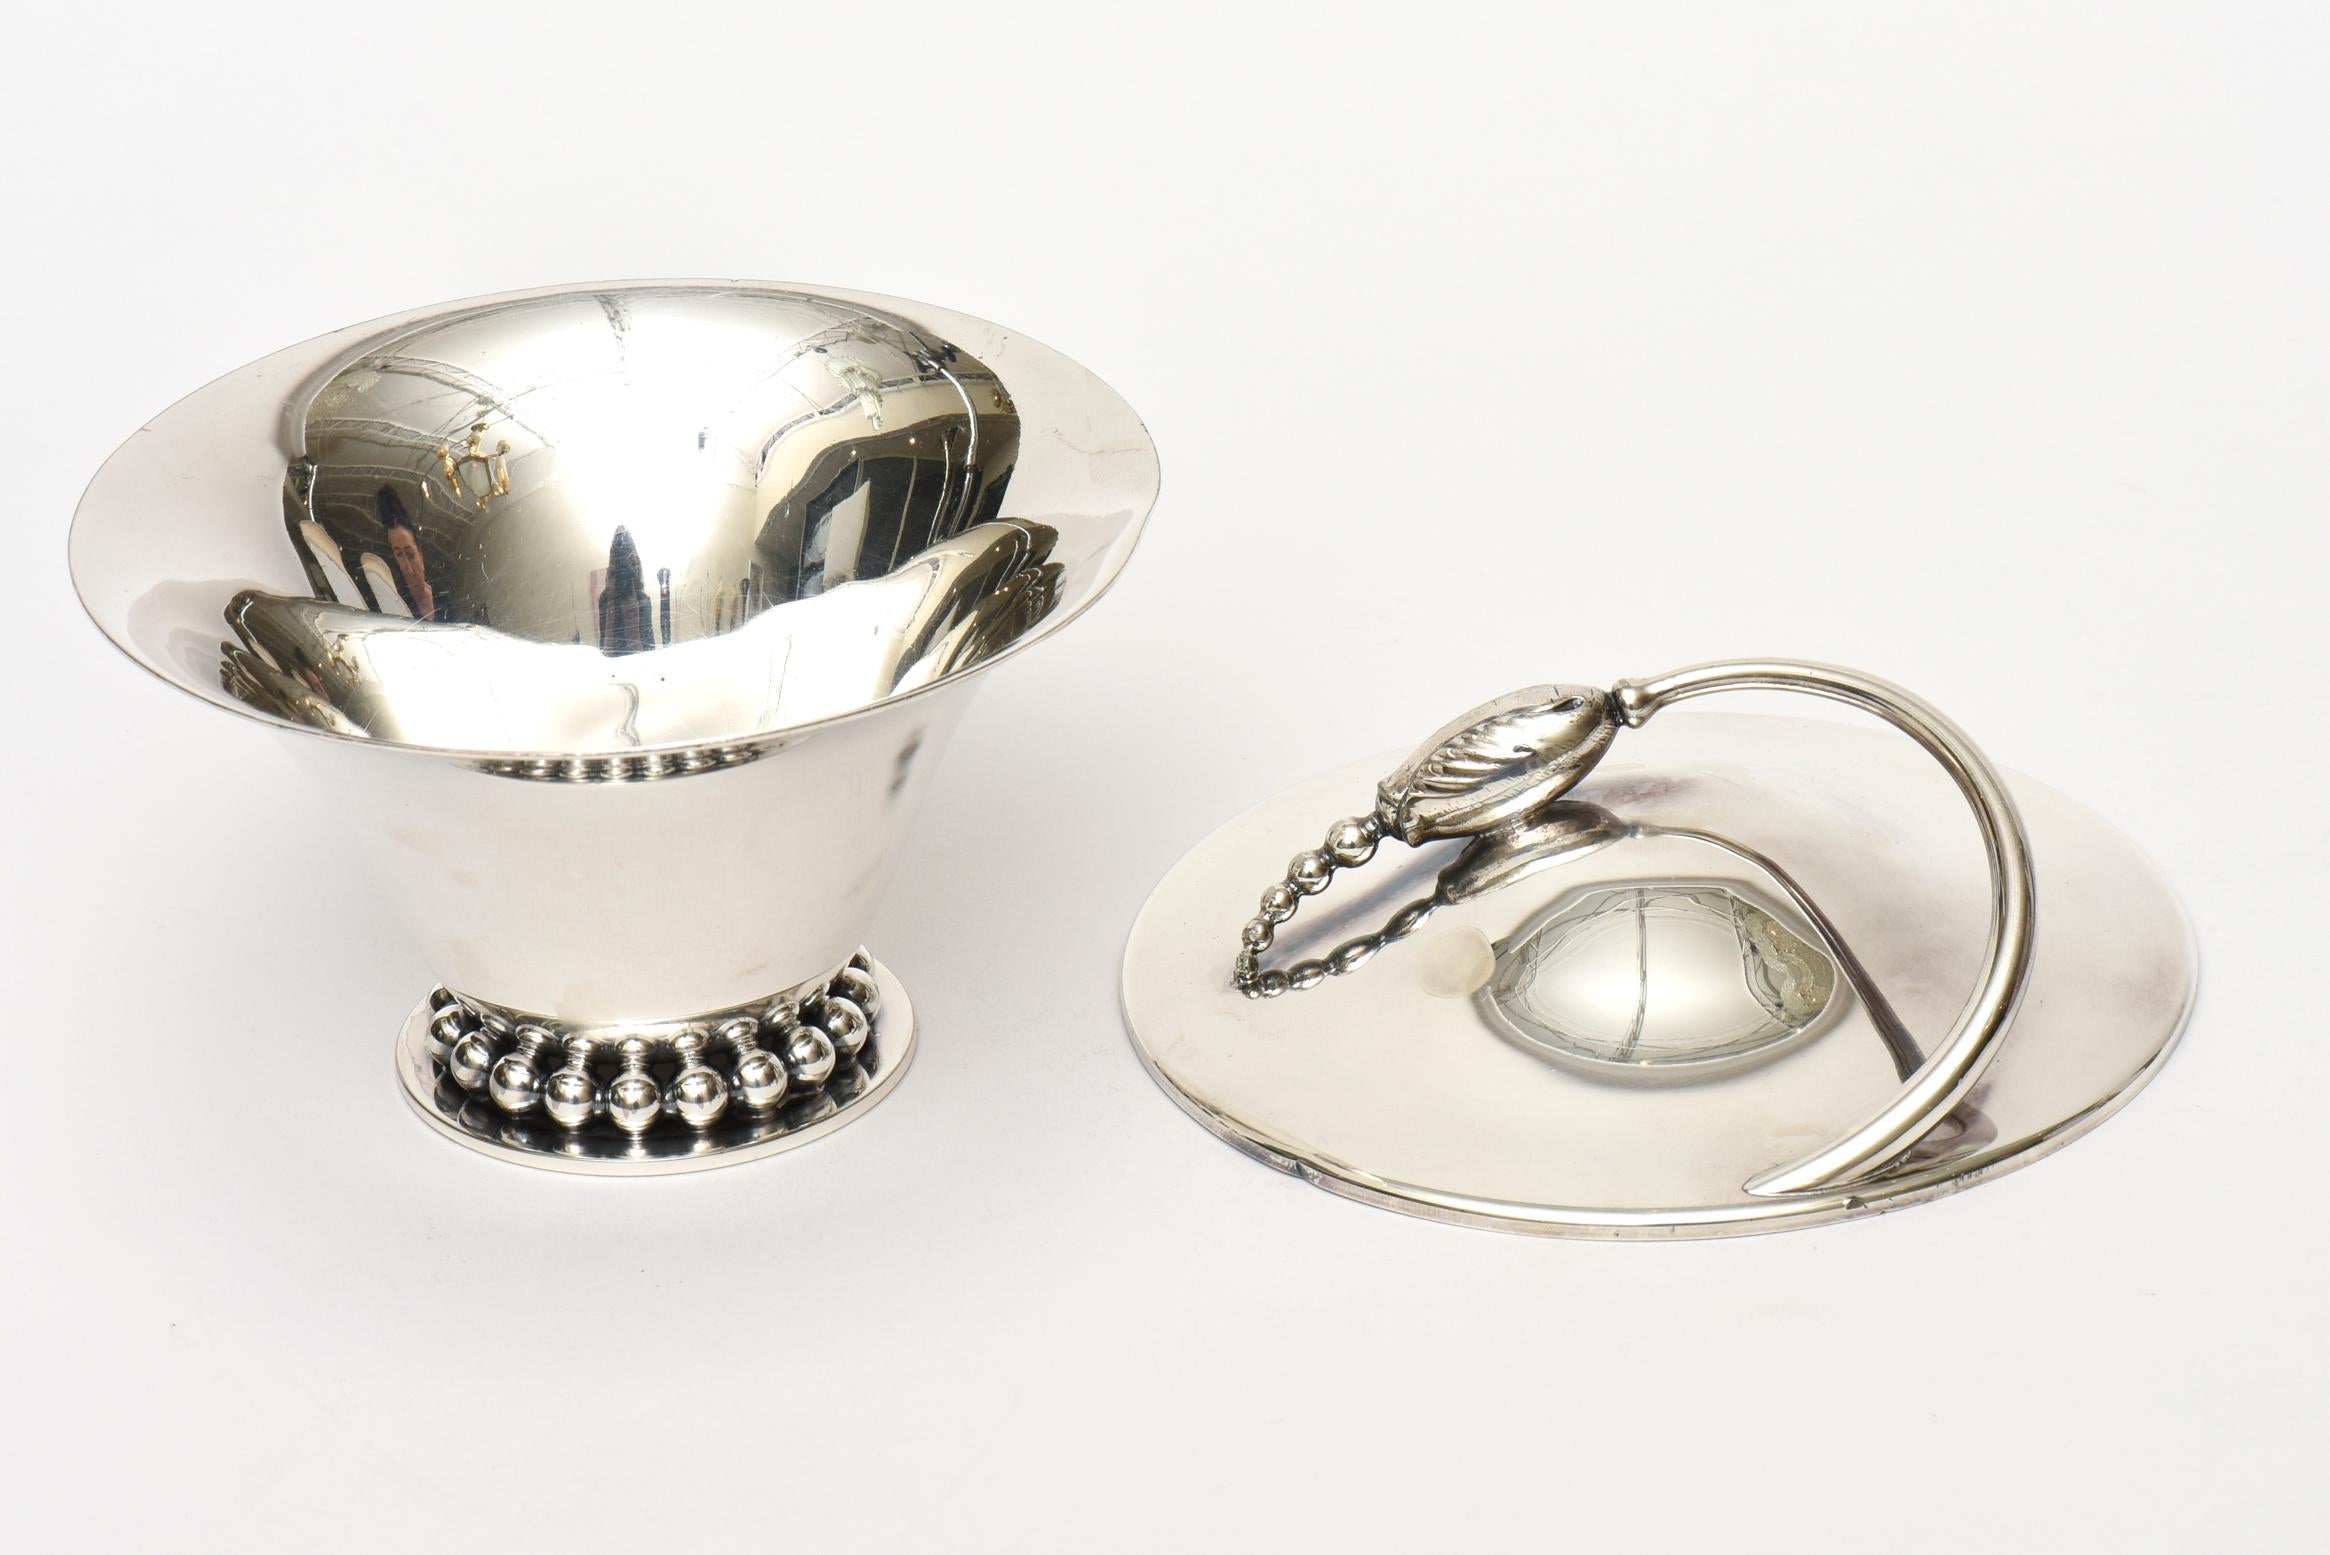 Mid-Century Modern Silver-Plate Beaded Vessel, Bowl And Serving Piece with Flower Pod Lid Vintage For Sale